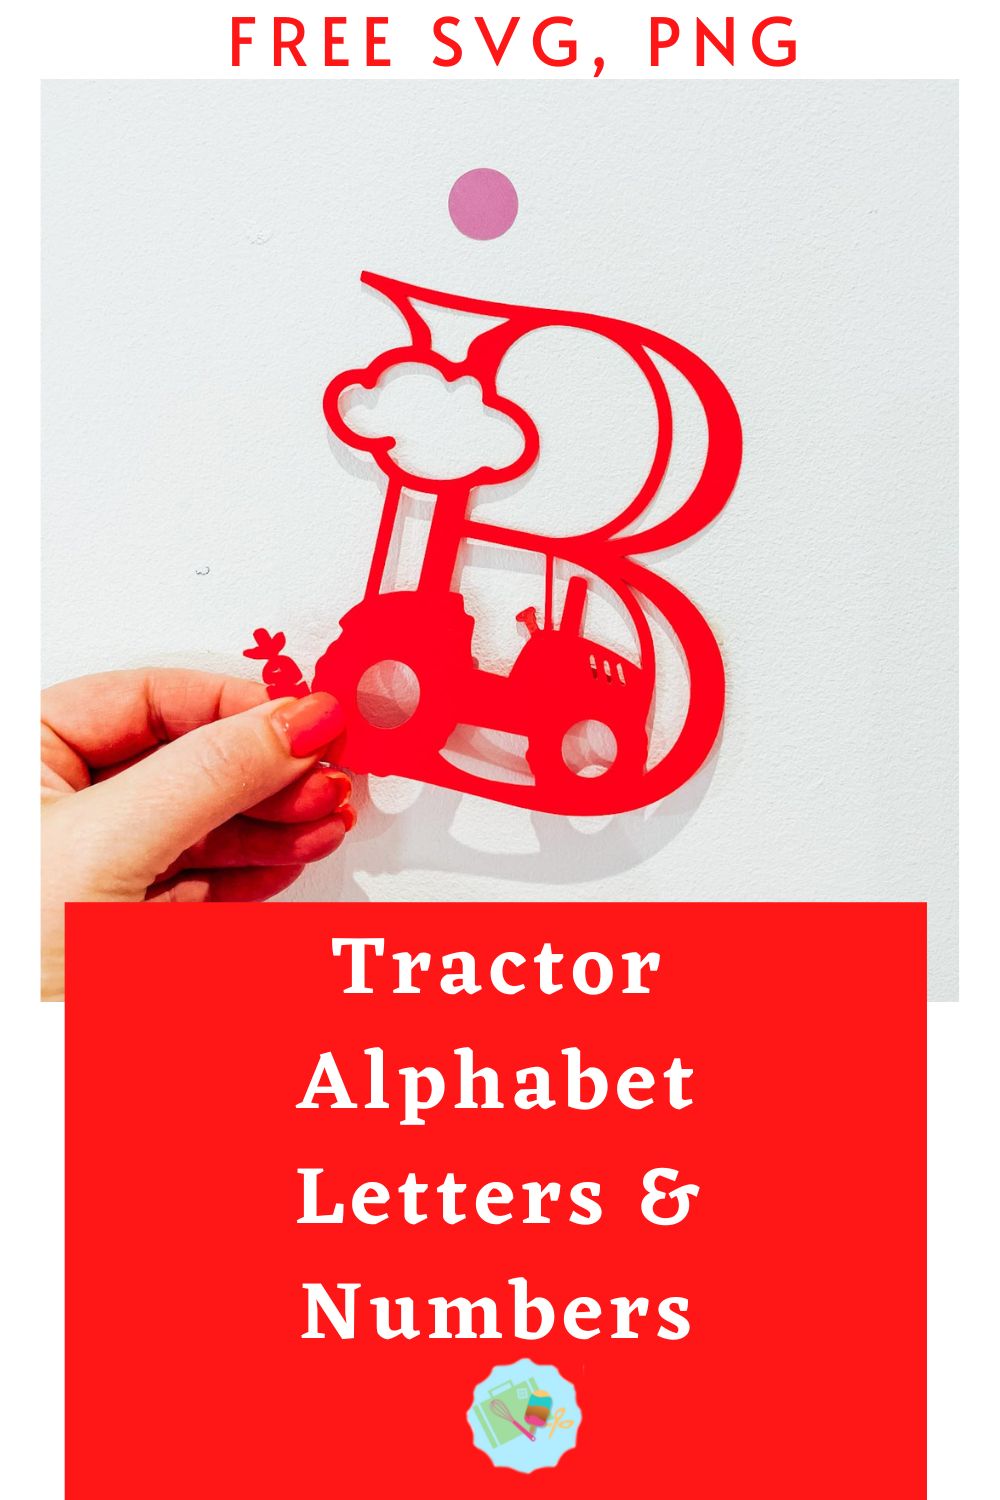 Free SVG PNG Tractor Alphabet Letters and Number for Crafting , Cake Toppers and Scrapbooking